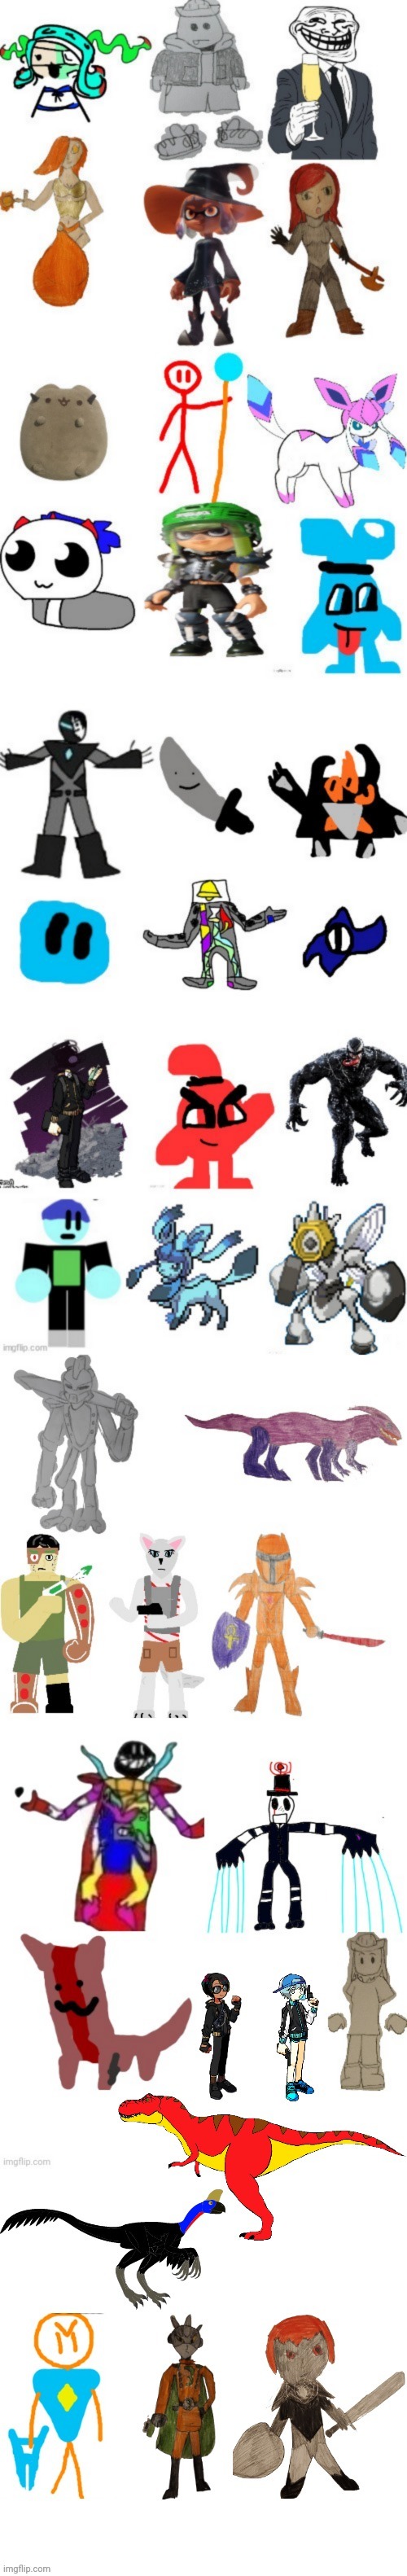 Bossfights oc list 4.0 | image tagged in bossfights oc list 4 0 | made w/ Imgflip meme maker